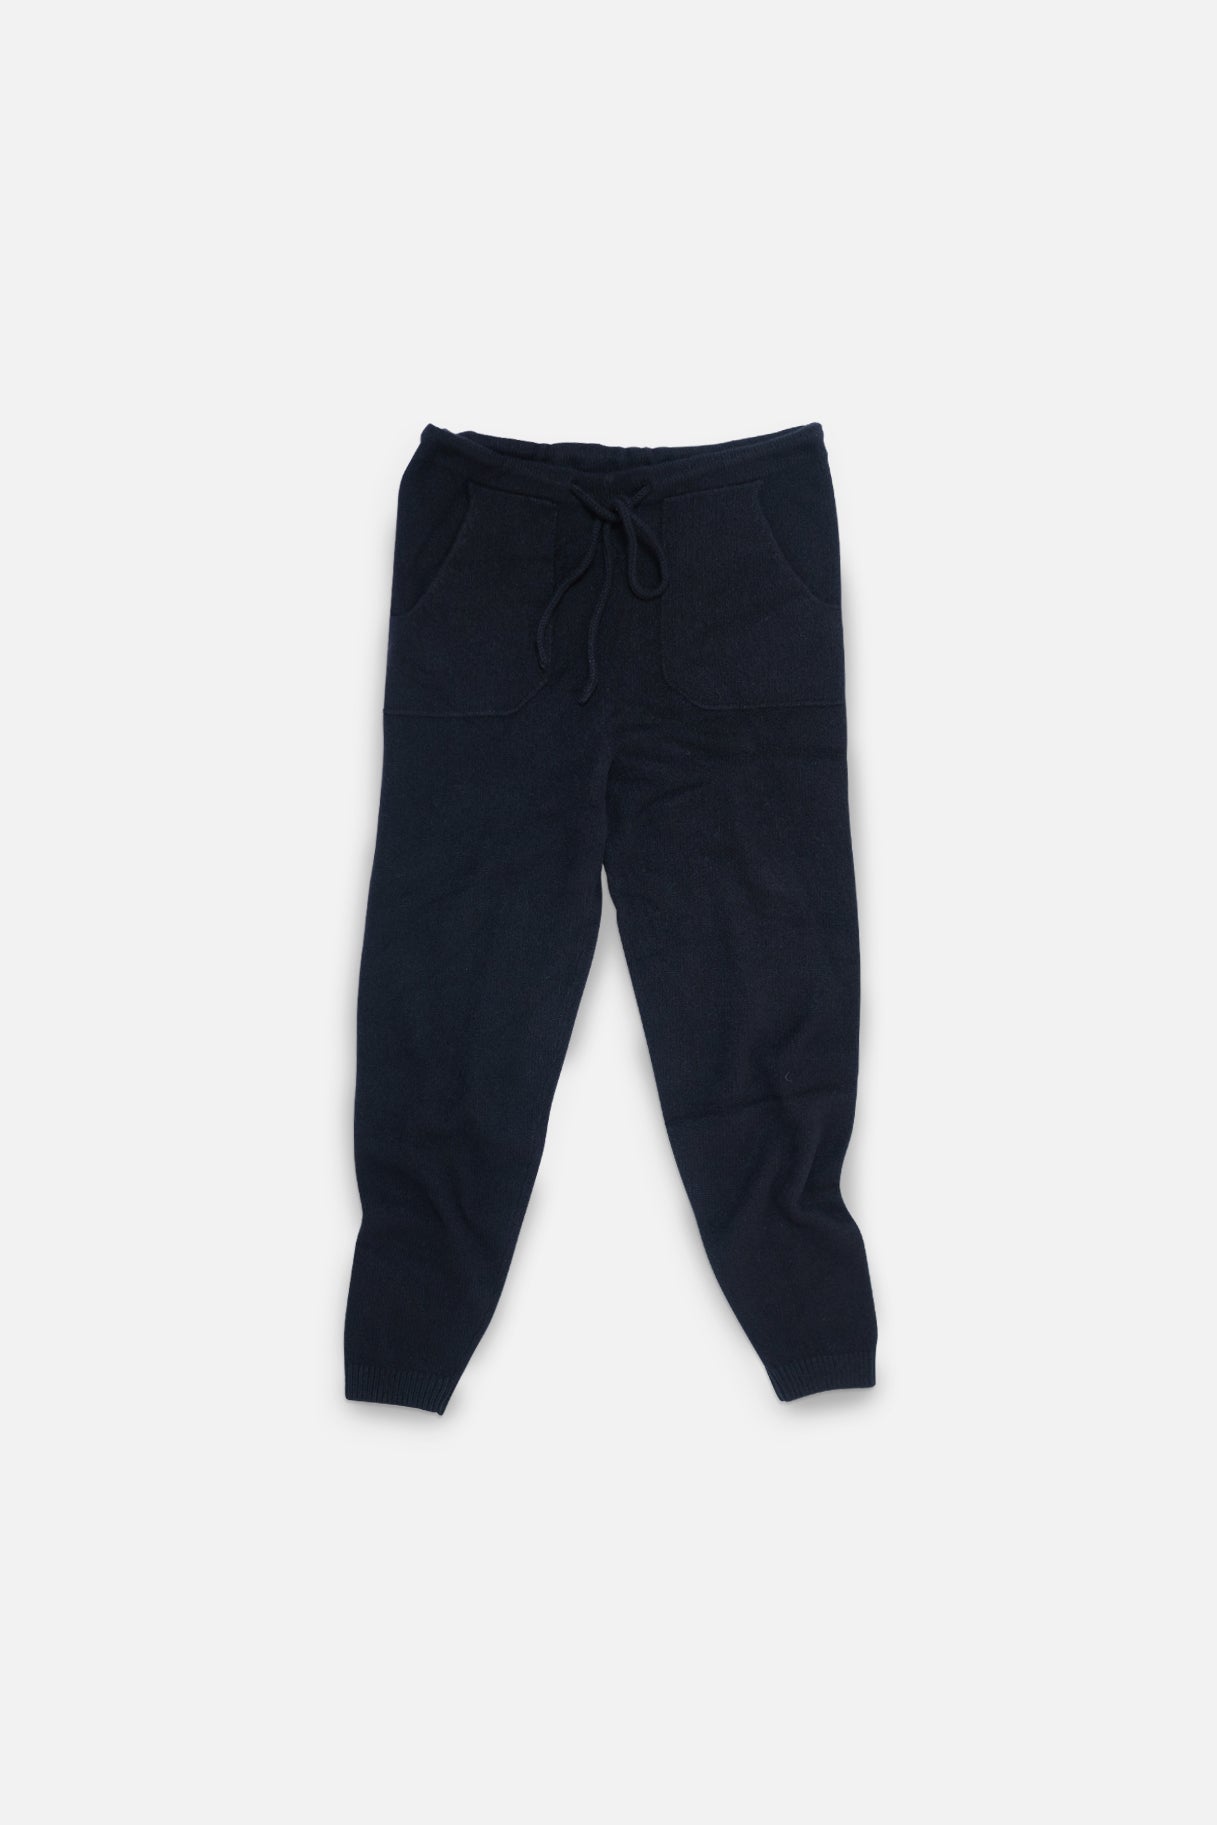 Black All Over Country Sweatpants - GBNY